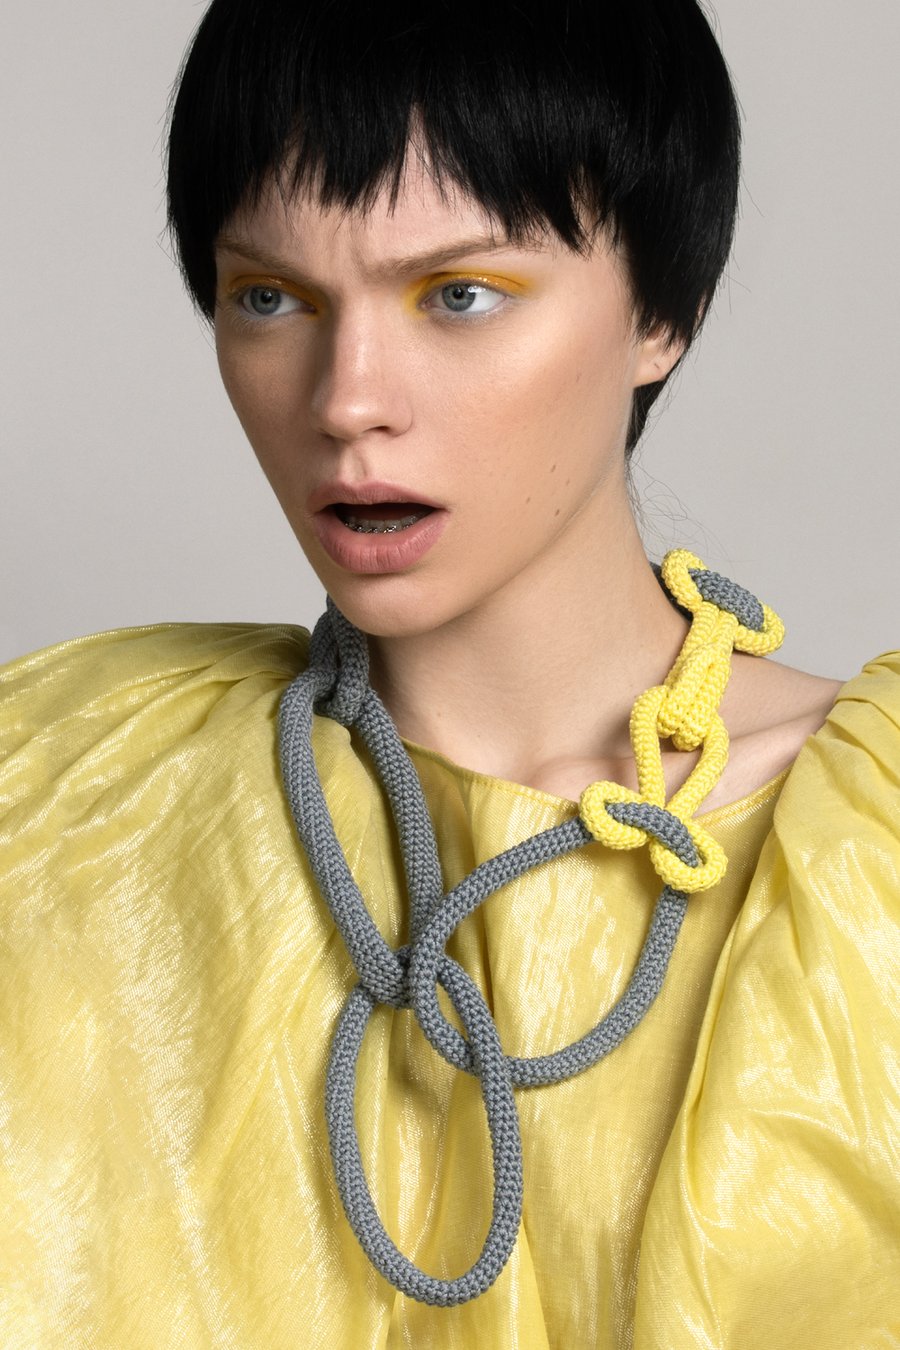 Image of Oversized Crochet Necklace in Gray and Illuminating Yellow 